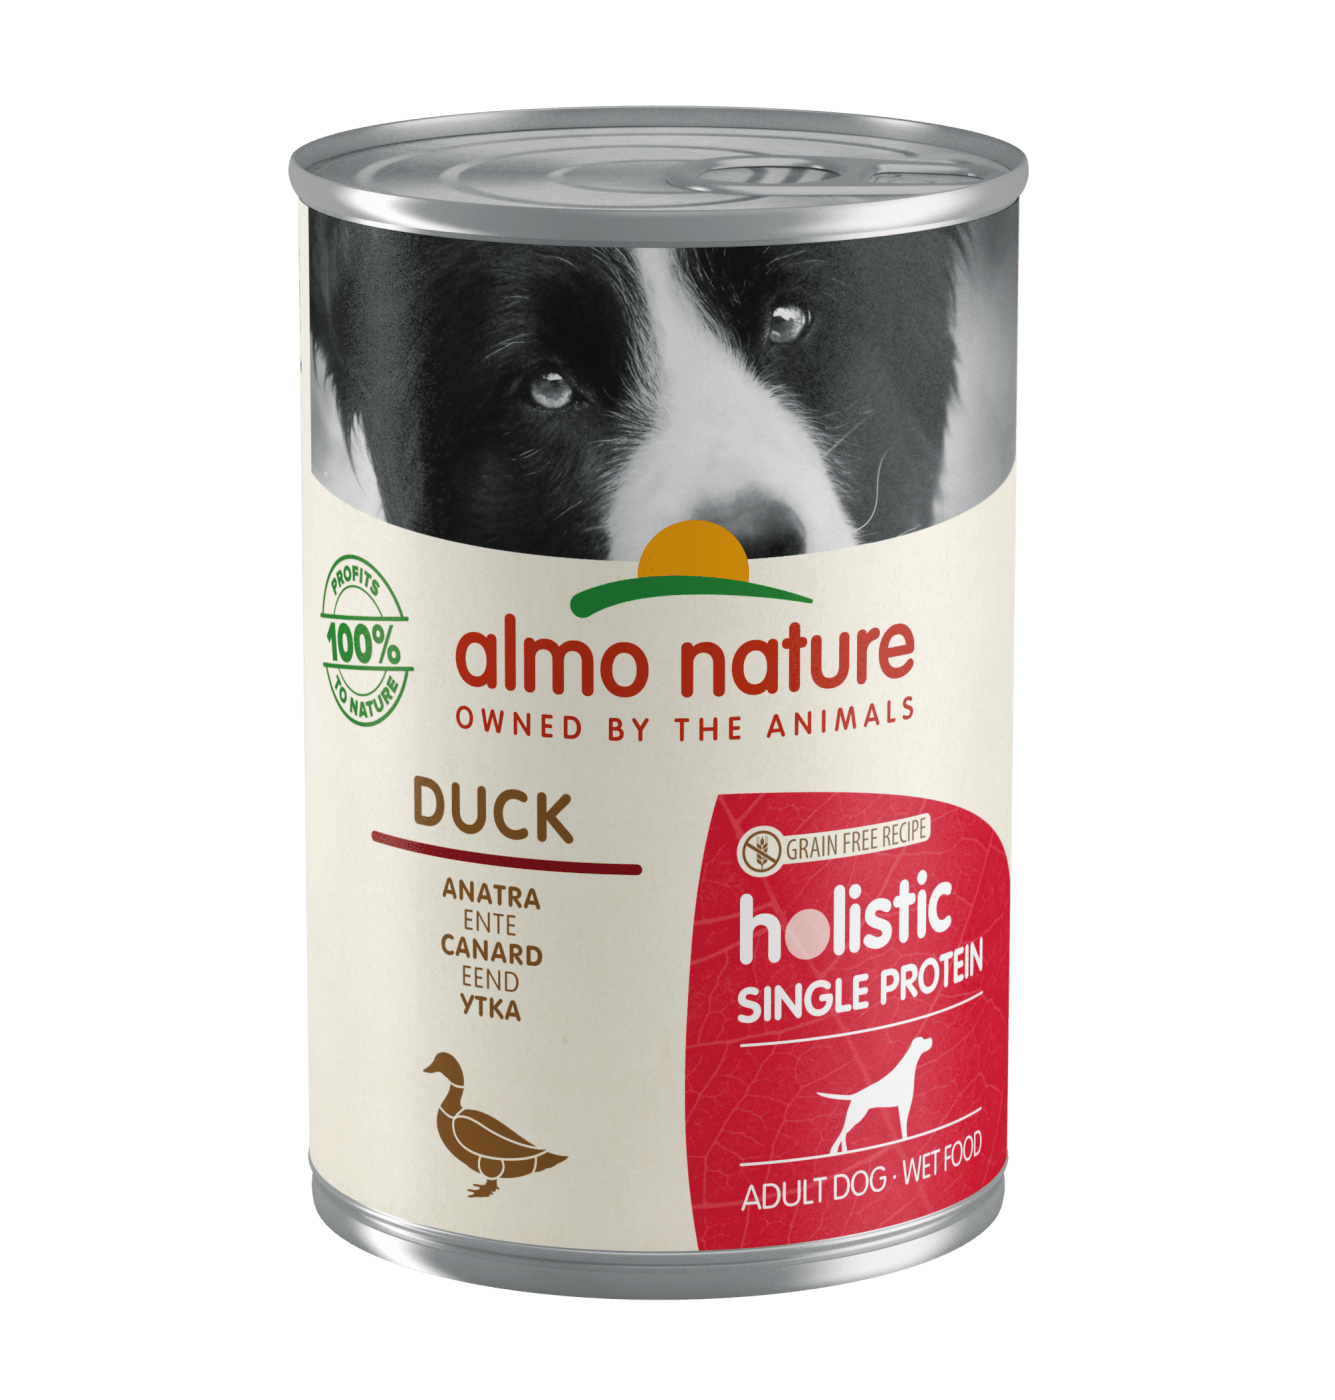 DOG WET HOLISTIC SINGLE PROTEIN PATO